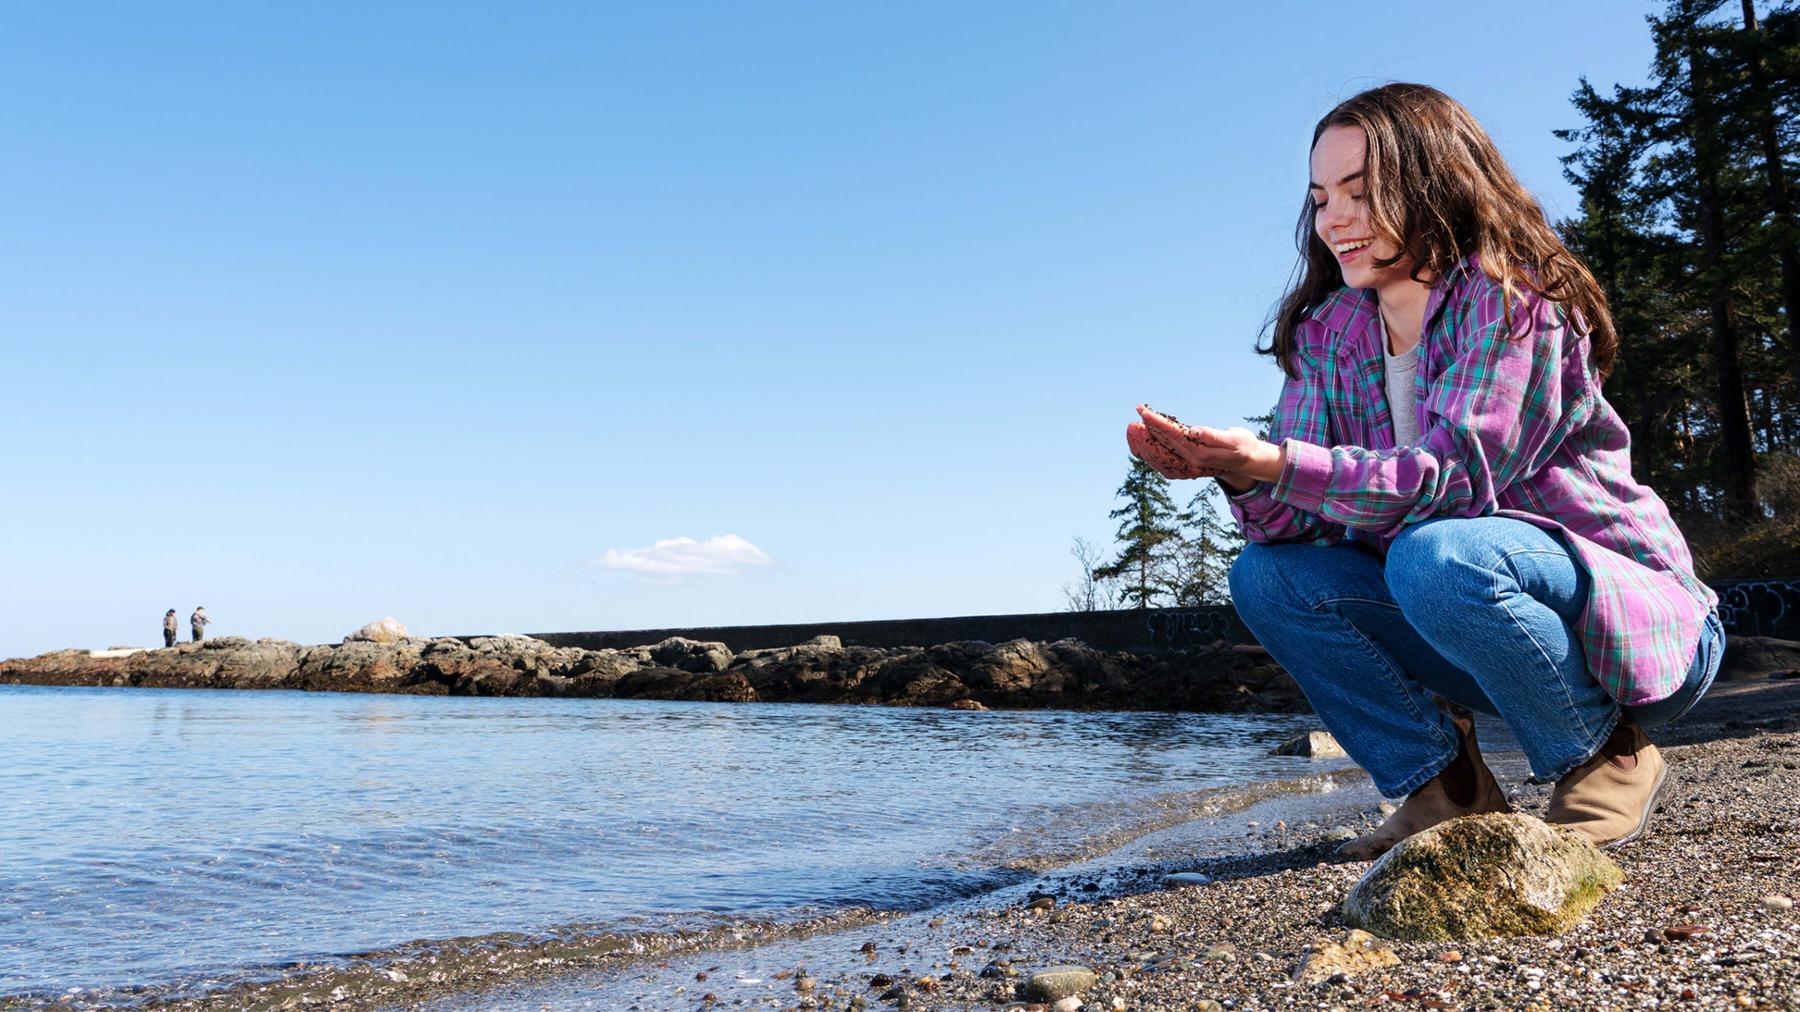 UVic student Quinn Bitz crouches on a rocky beach, holding pebbles in her hand